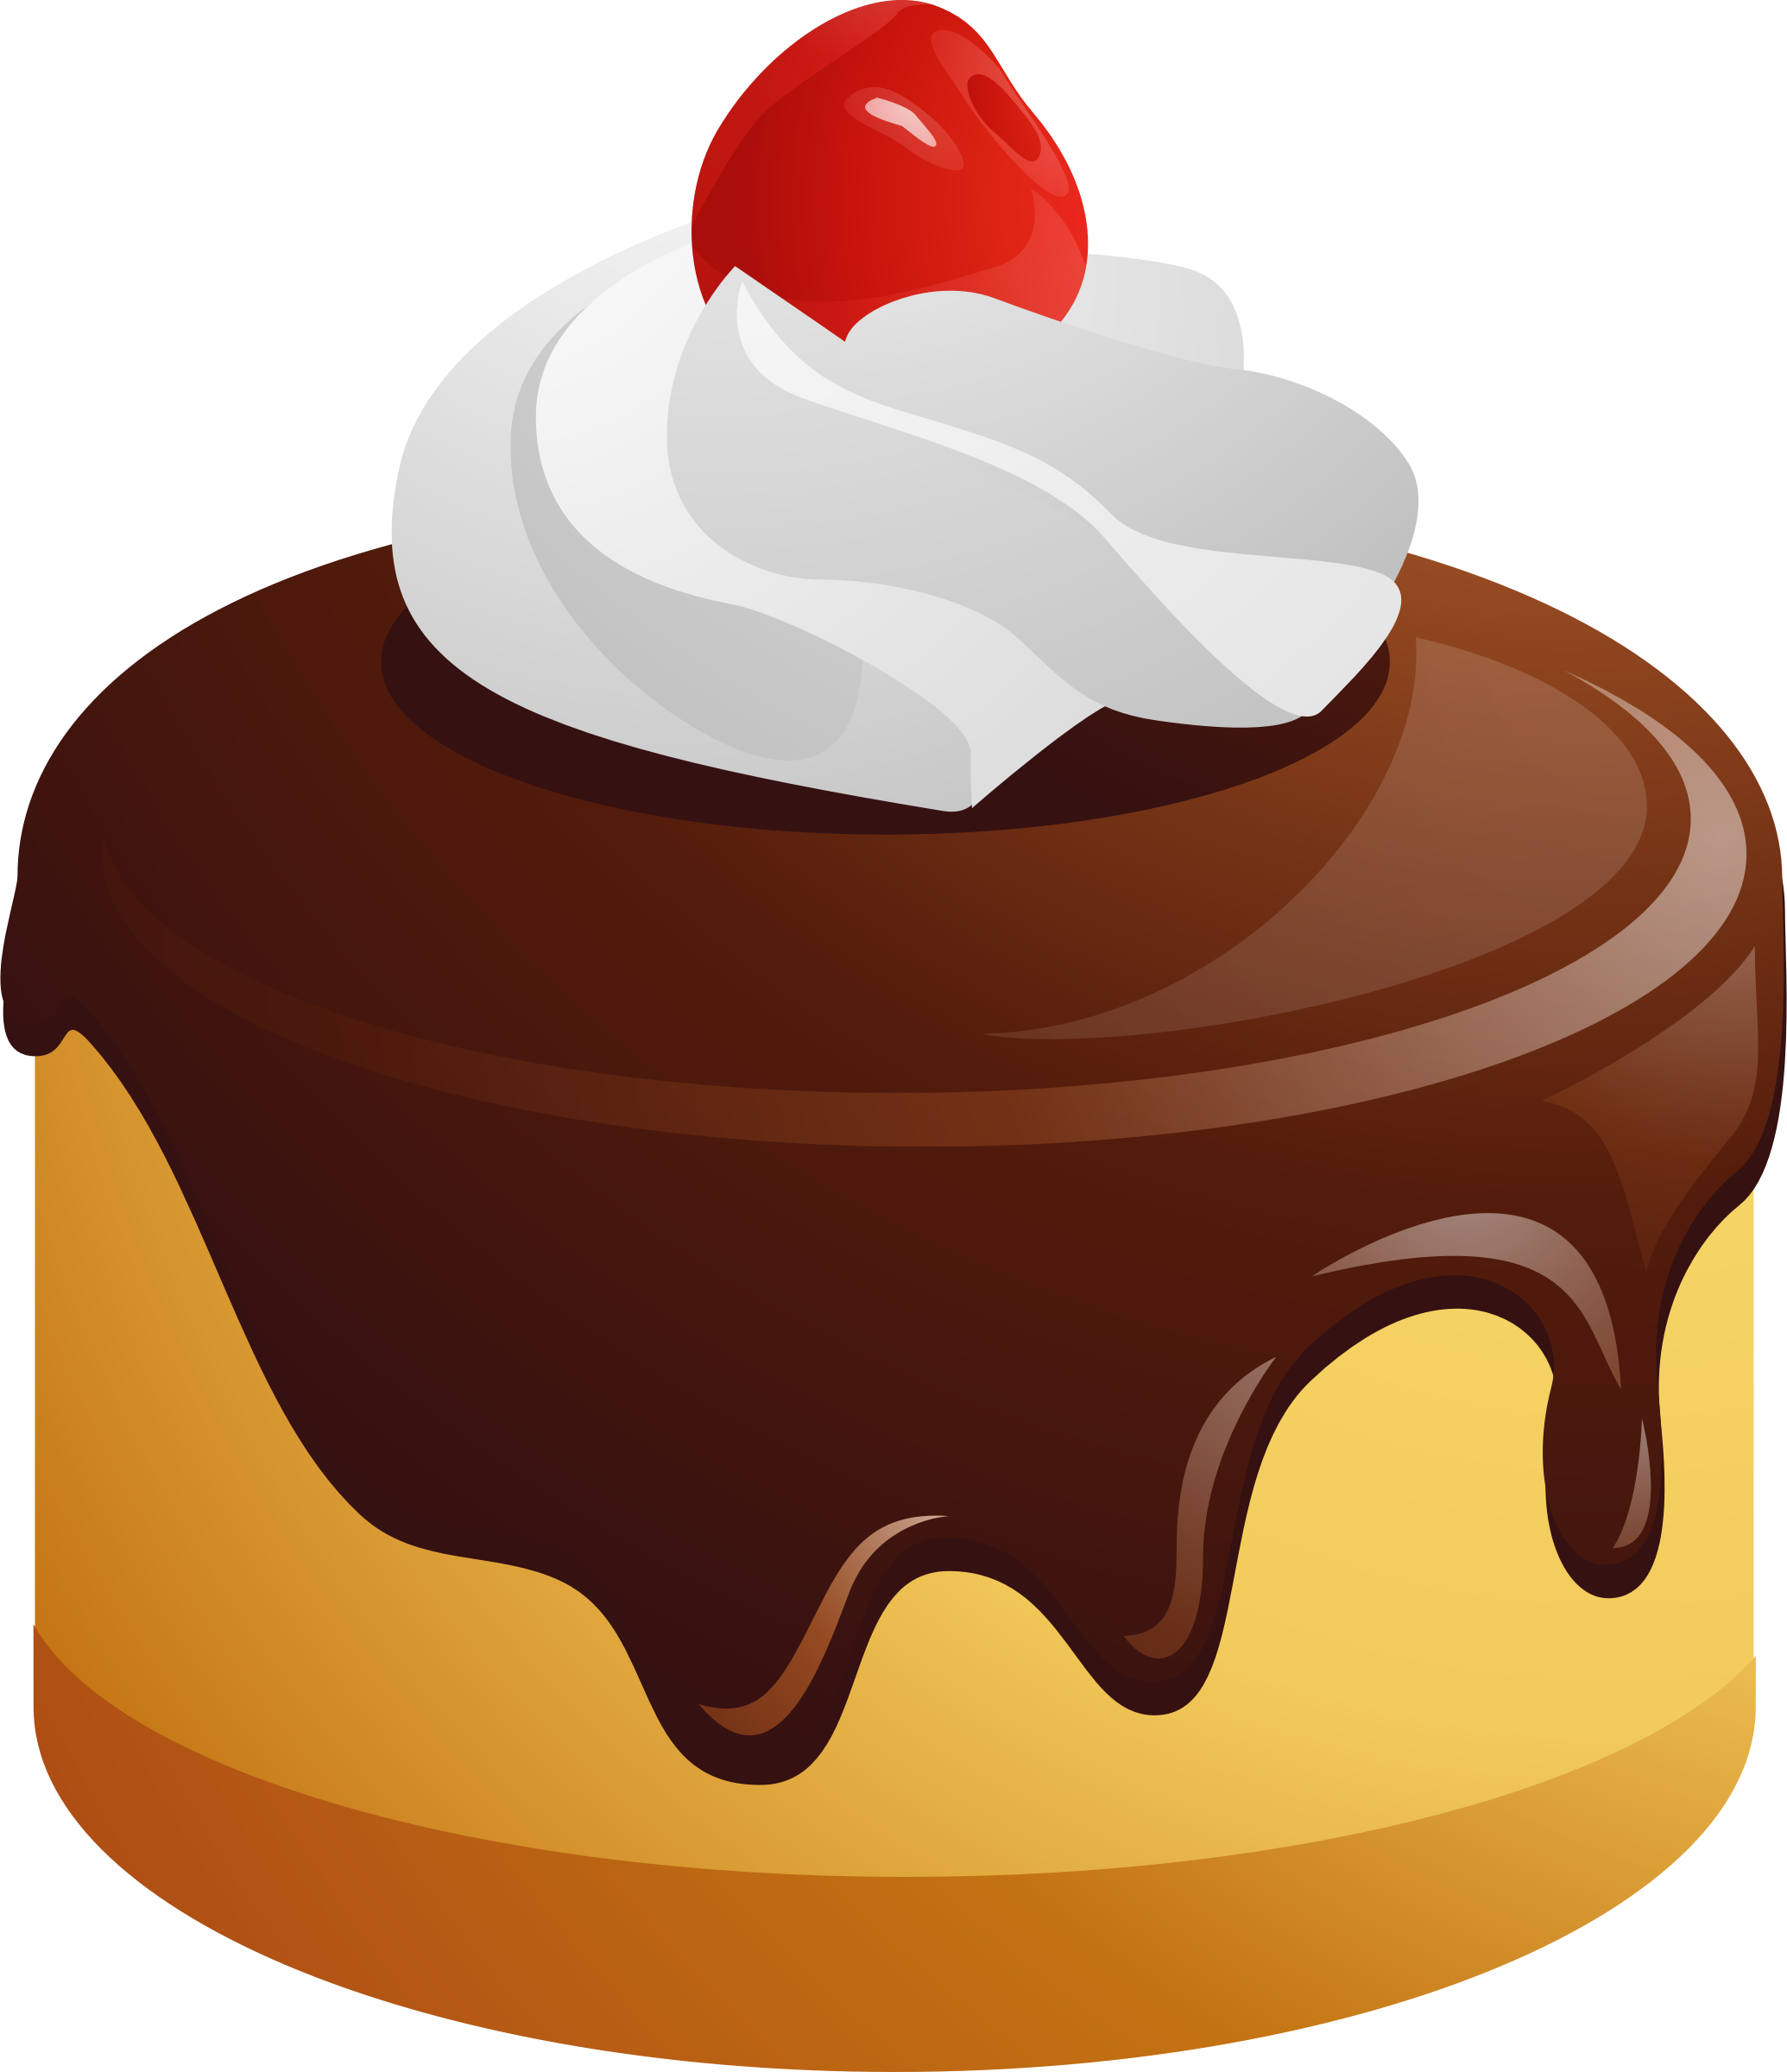 Cake PNG images free download, birthday cake PNG images free